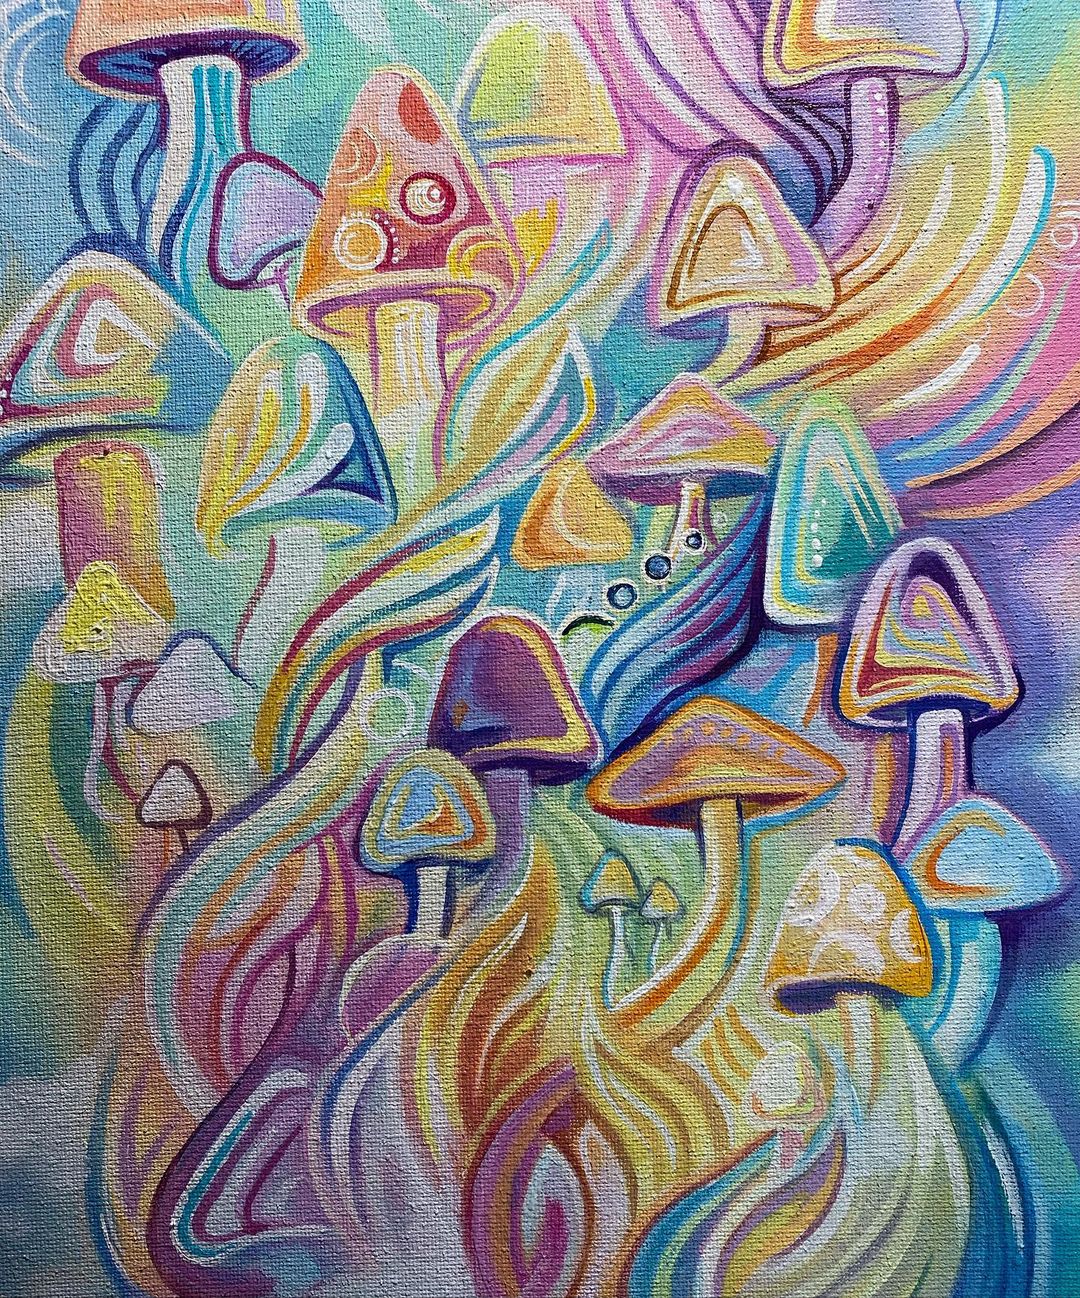 Colourful mushroom design painted in acrylic on canvas.